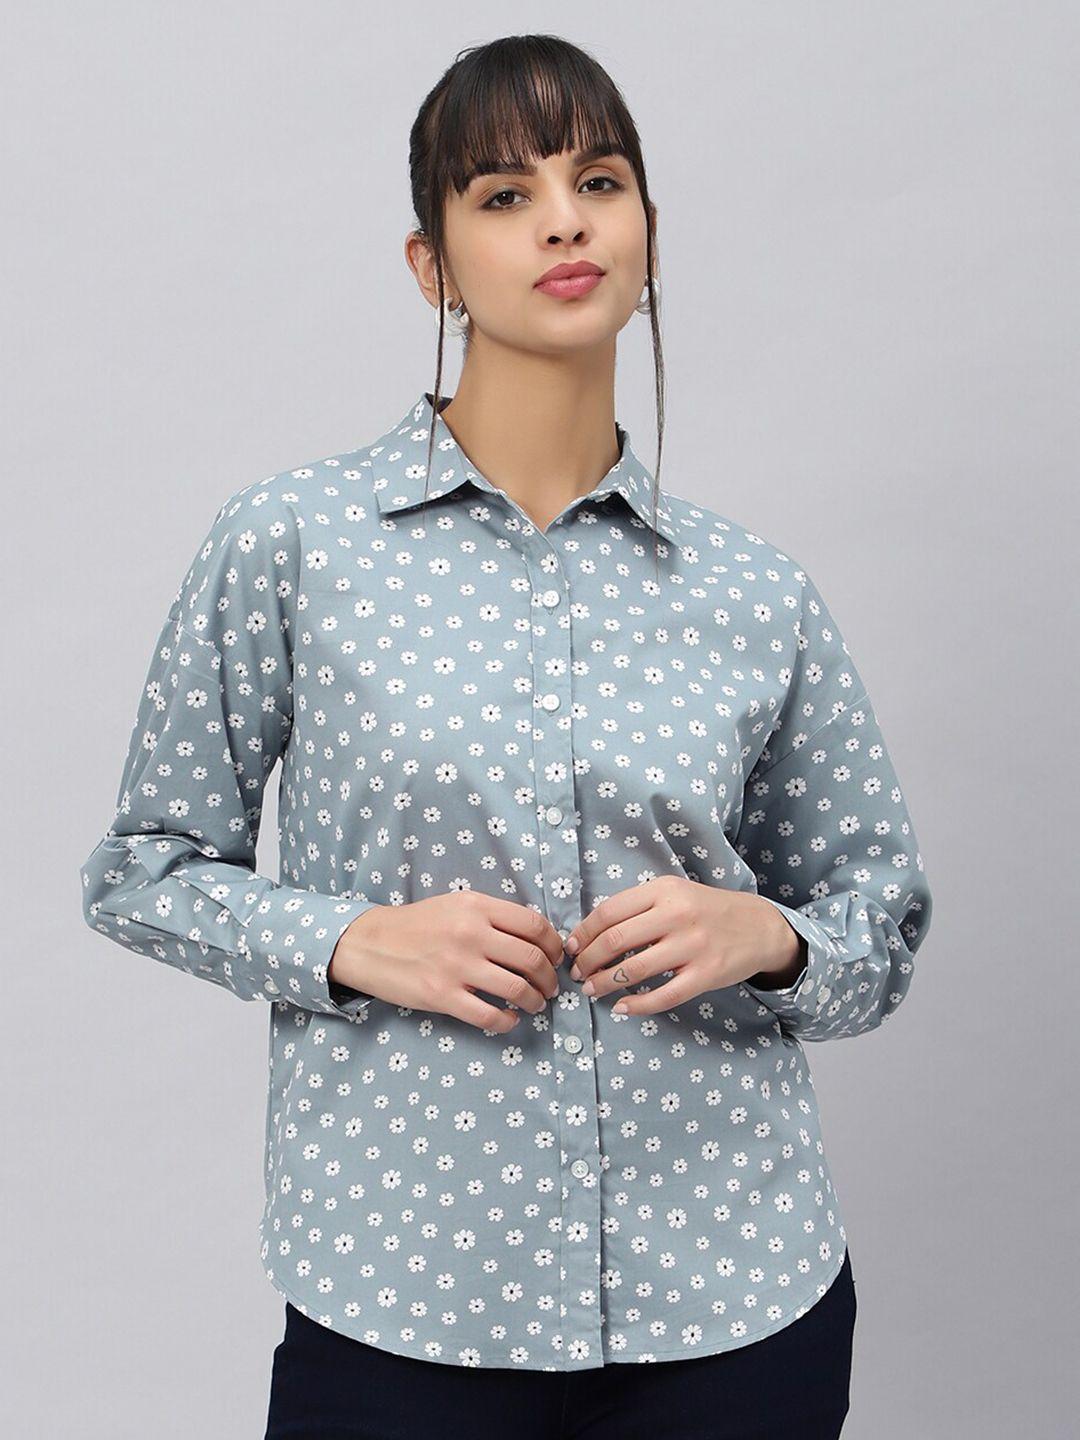 oui comfort floral printed spread collar regular fit cotton casual shirt